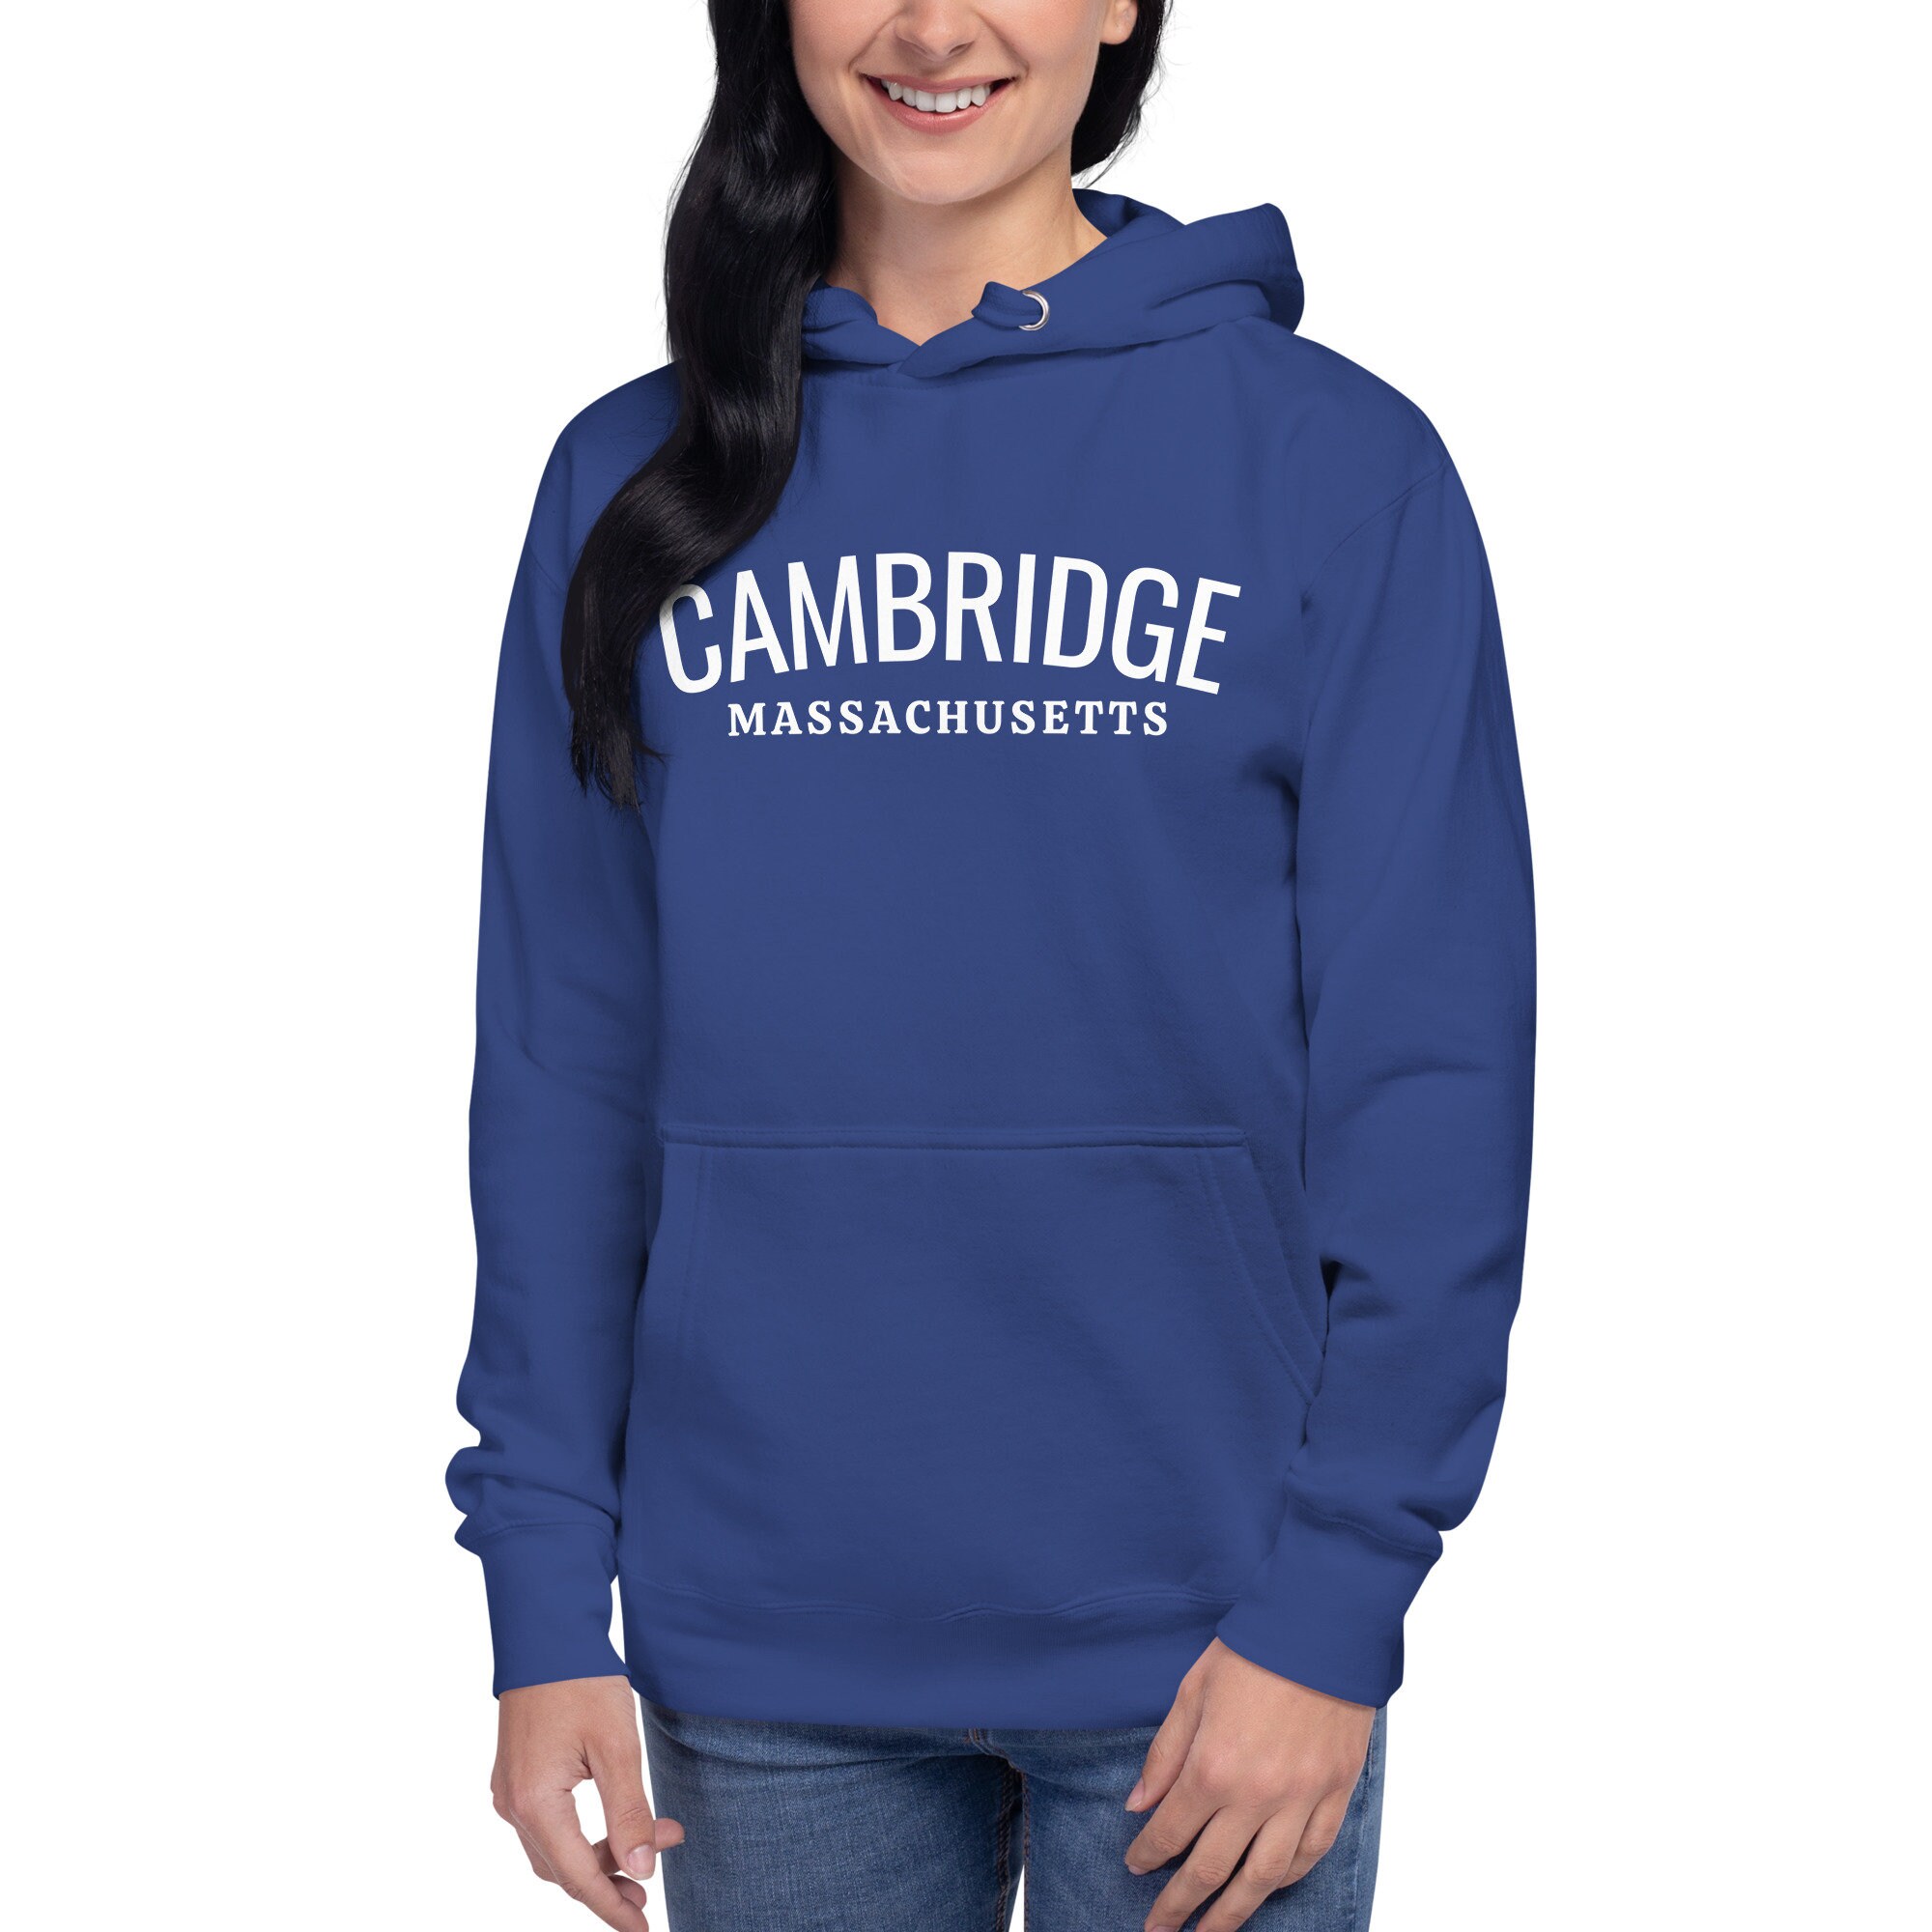 AAKEH04 Cambridge University Hoodie Kids Official Licensed Product Merchandise Embroidered Applique Souvenir Gift Premium Quality Boys Girls Hooded Sweatshirts 